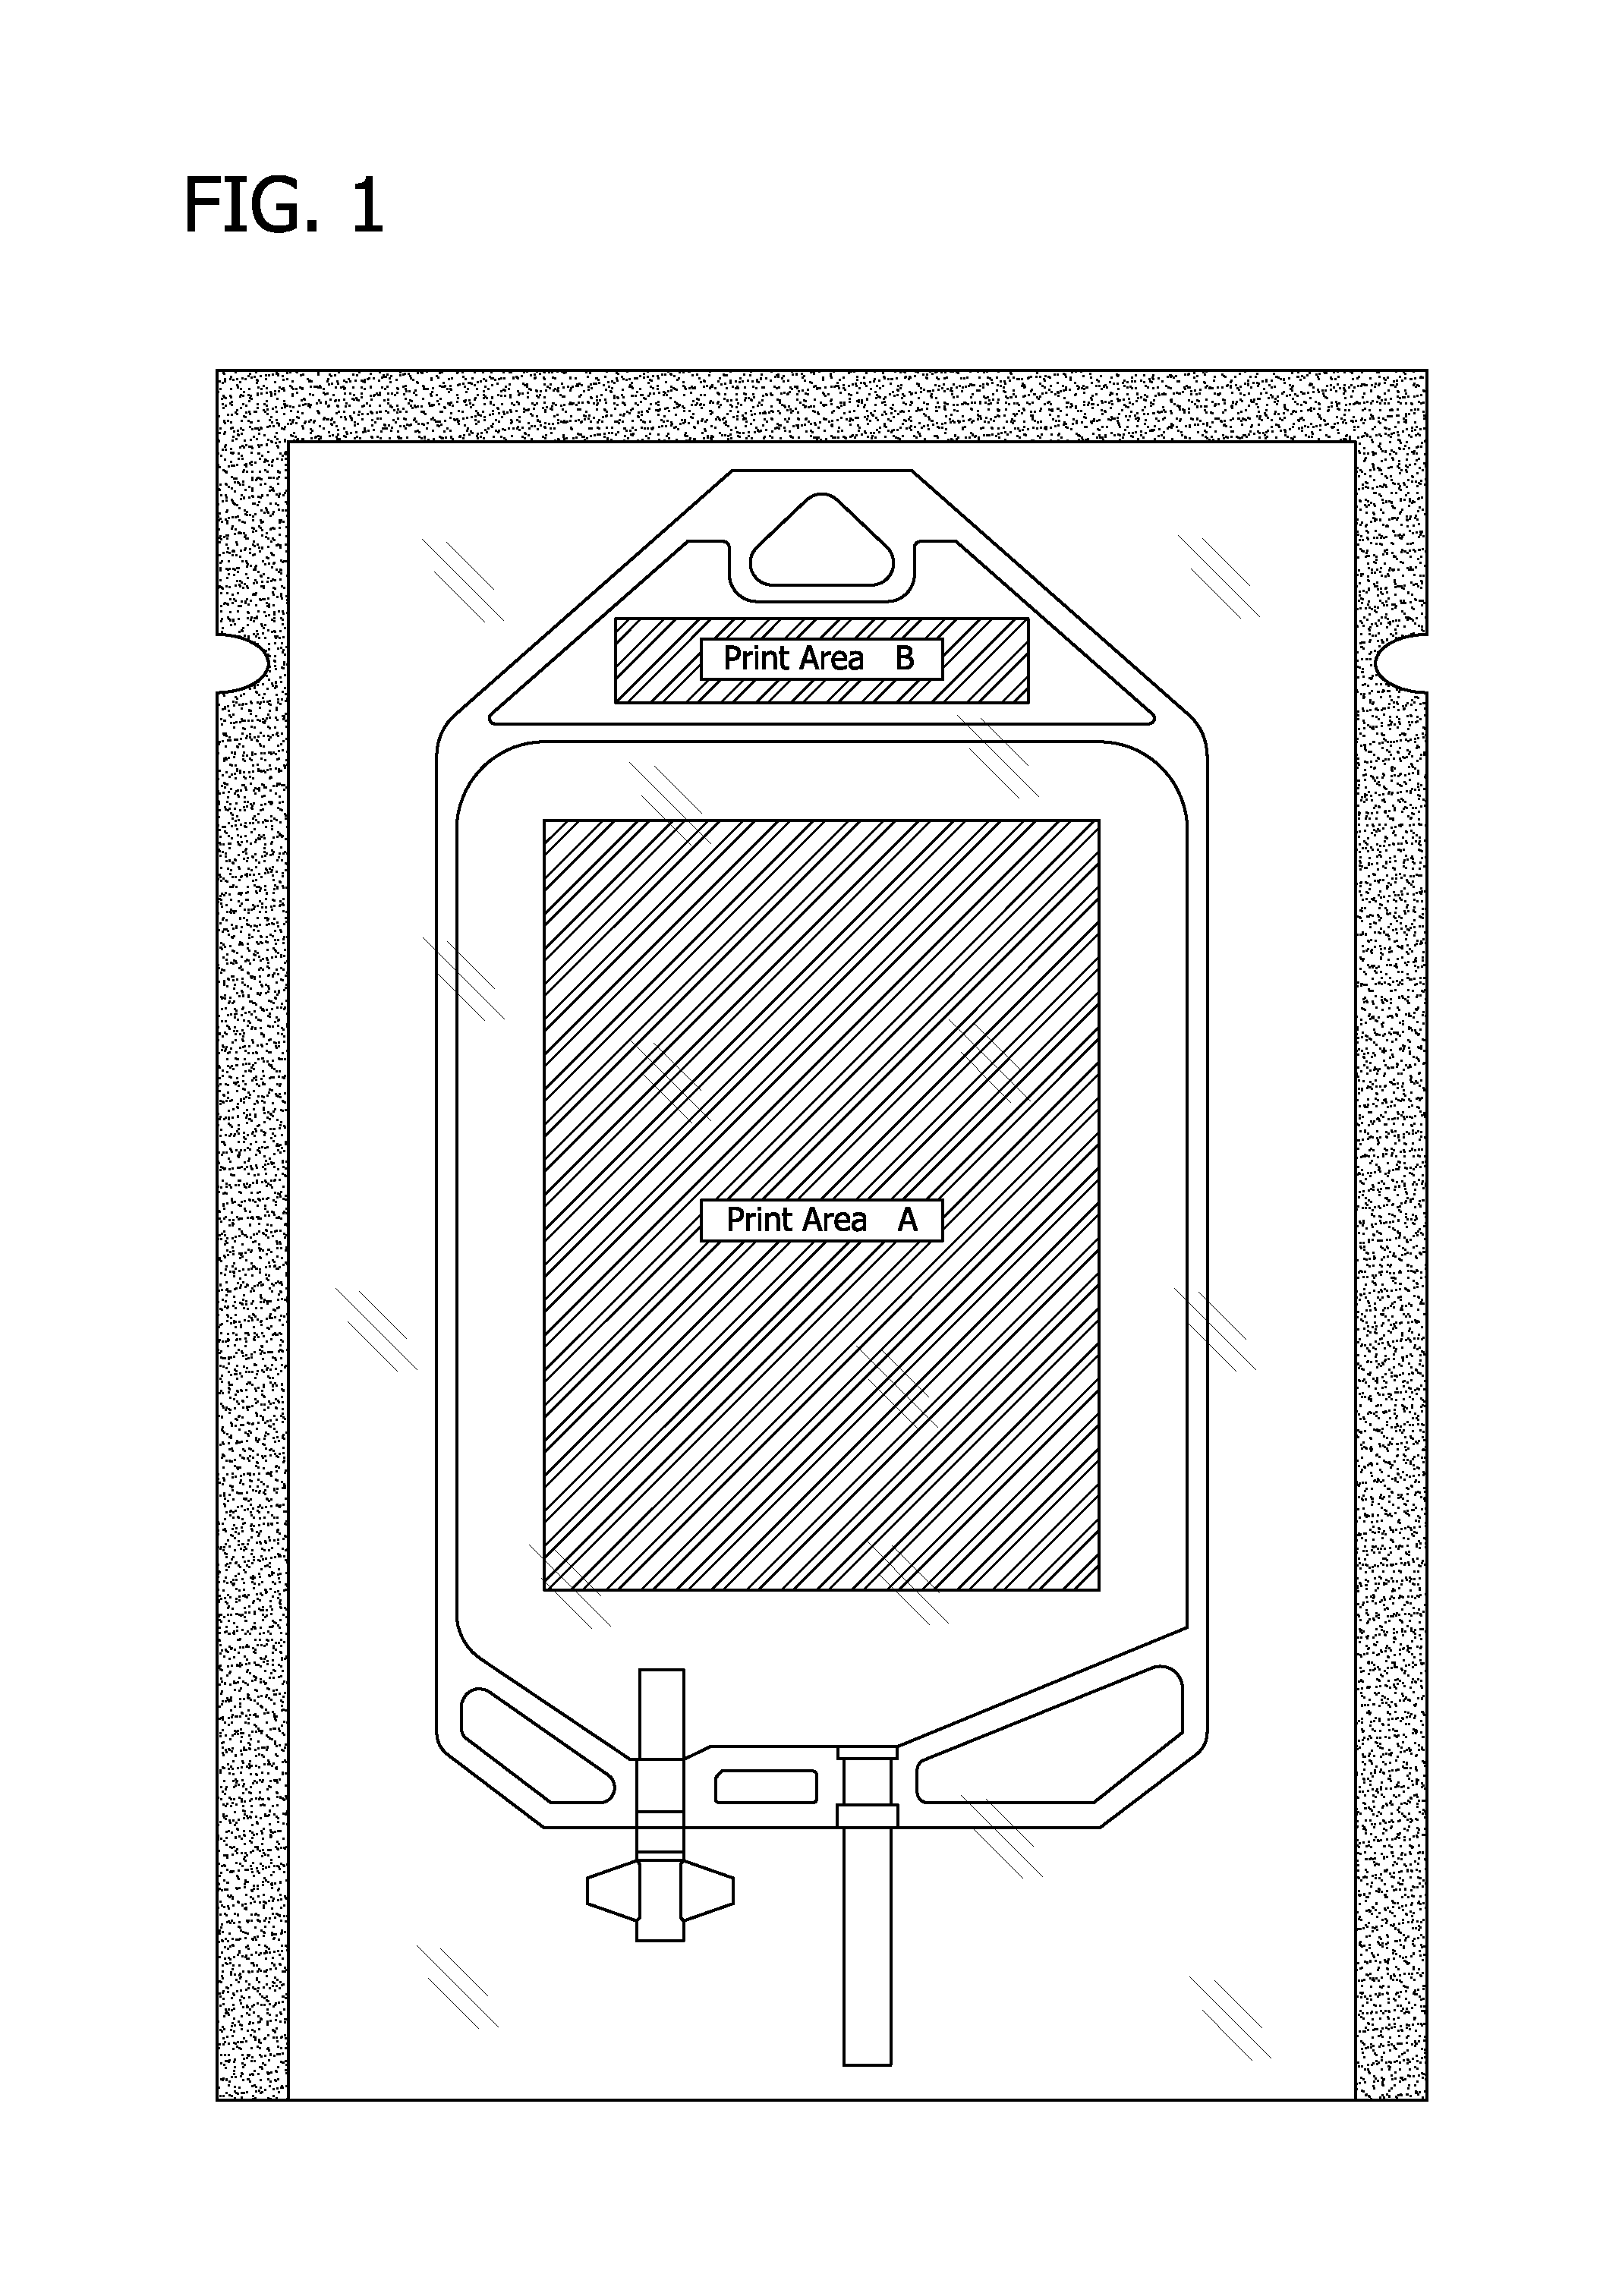 Packaging system for preserving a nonoxygenated hemoglobin based oxygen therapeutic product